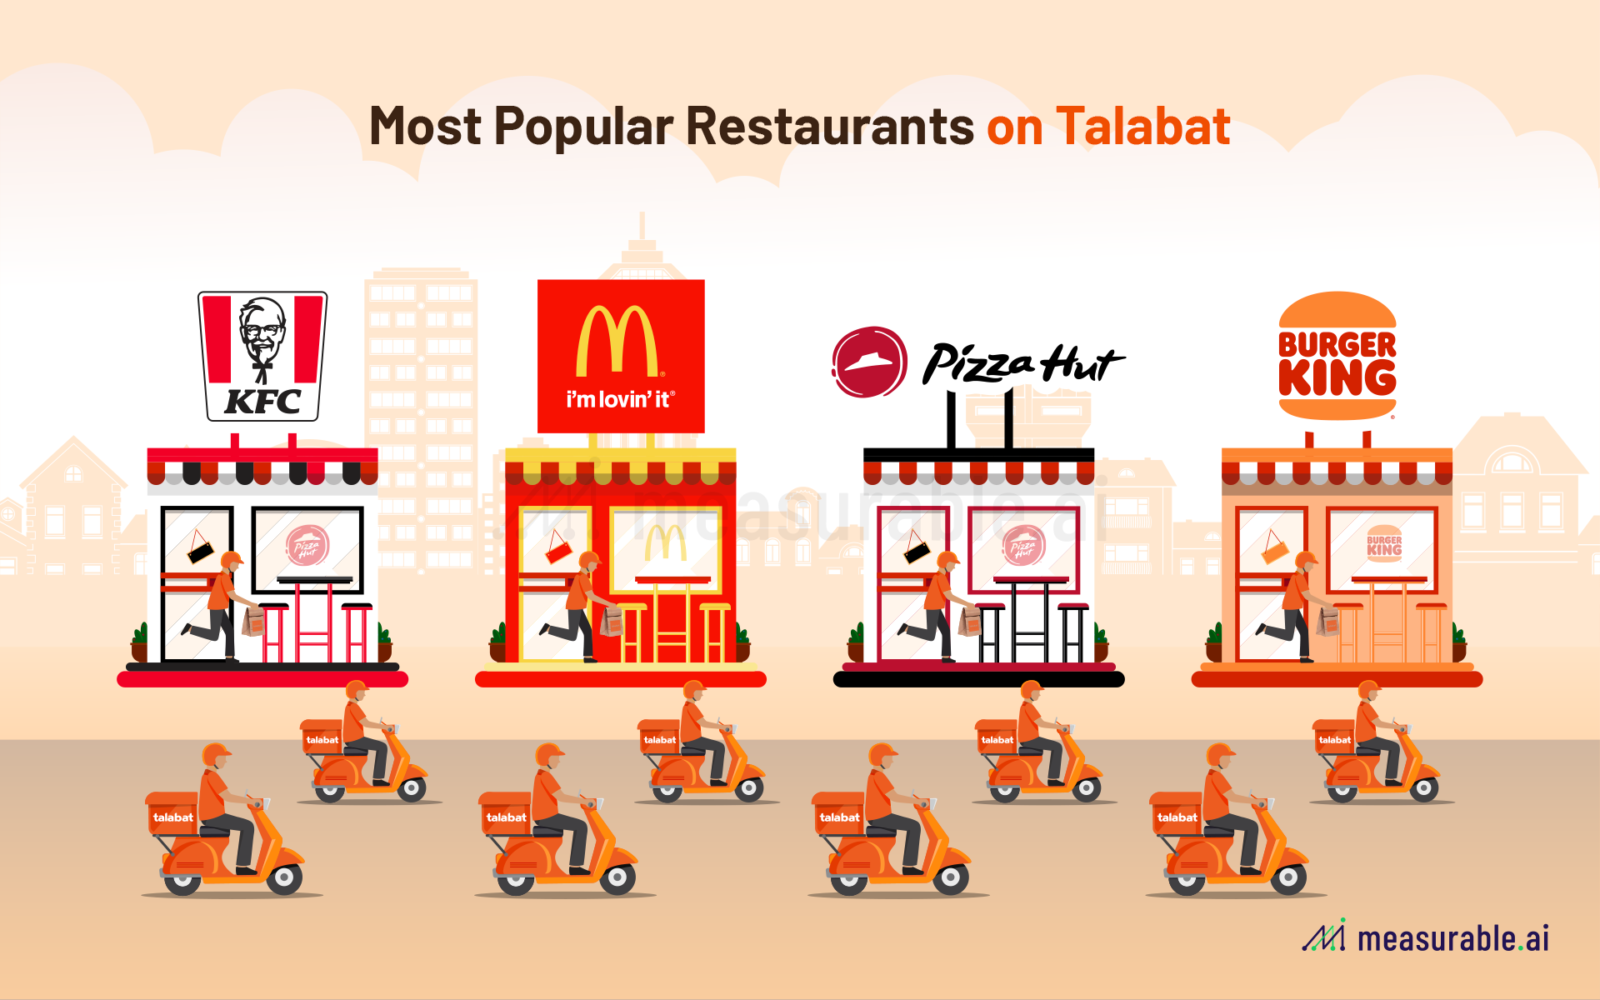 Most Popular Restaurants for Talabat in the UAE